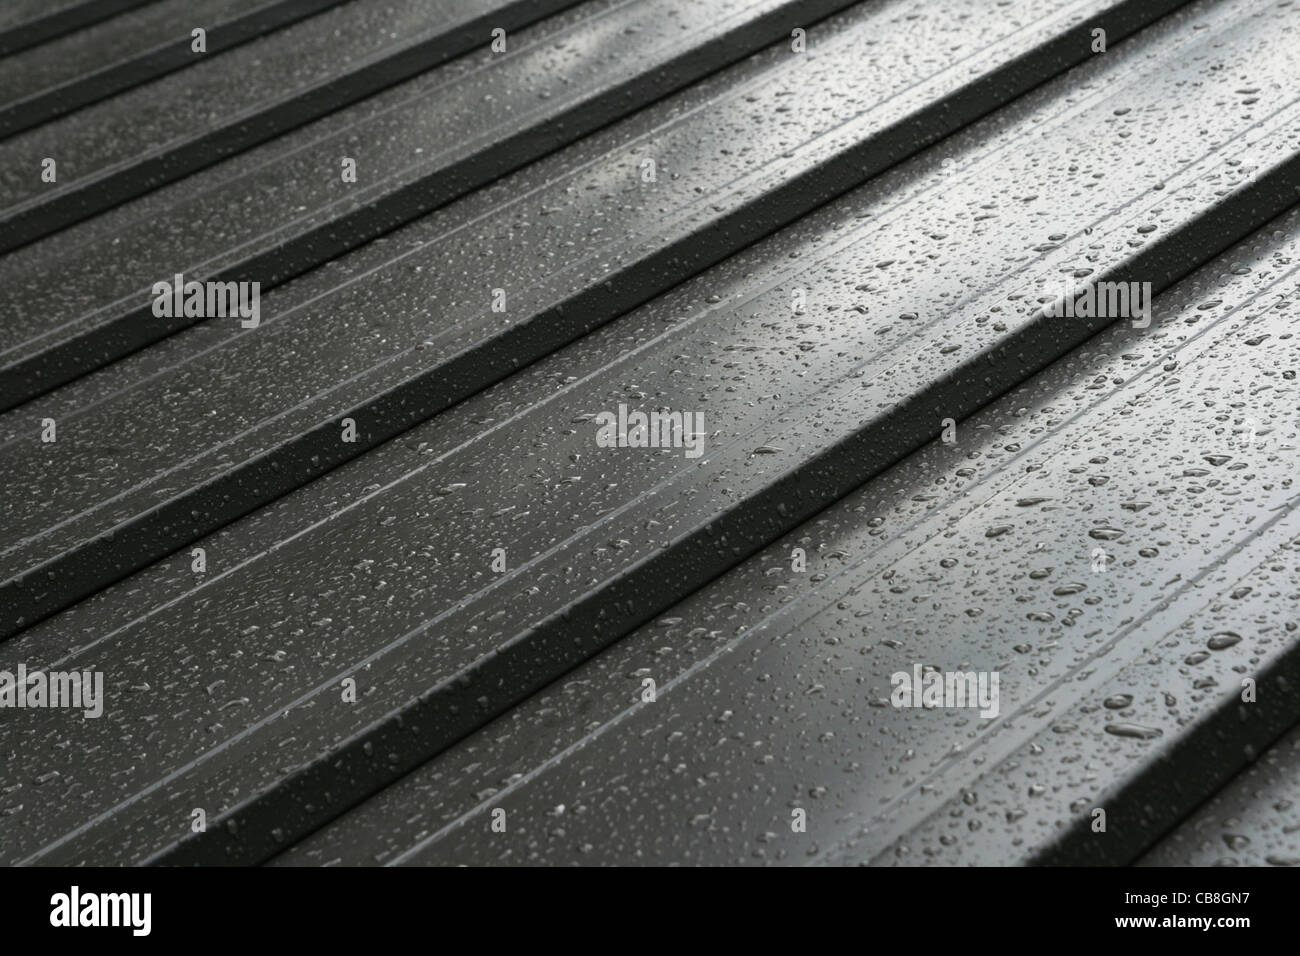 dark metal roof detail with raindrops Stock Photo